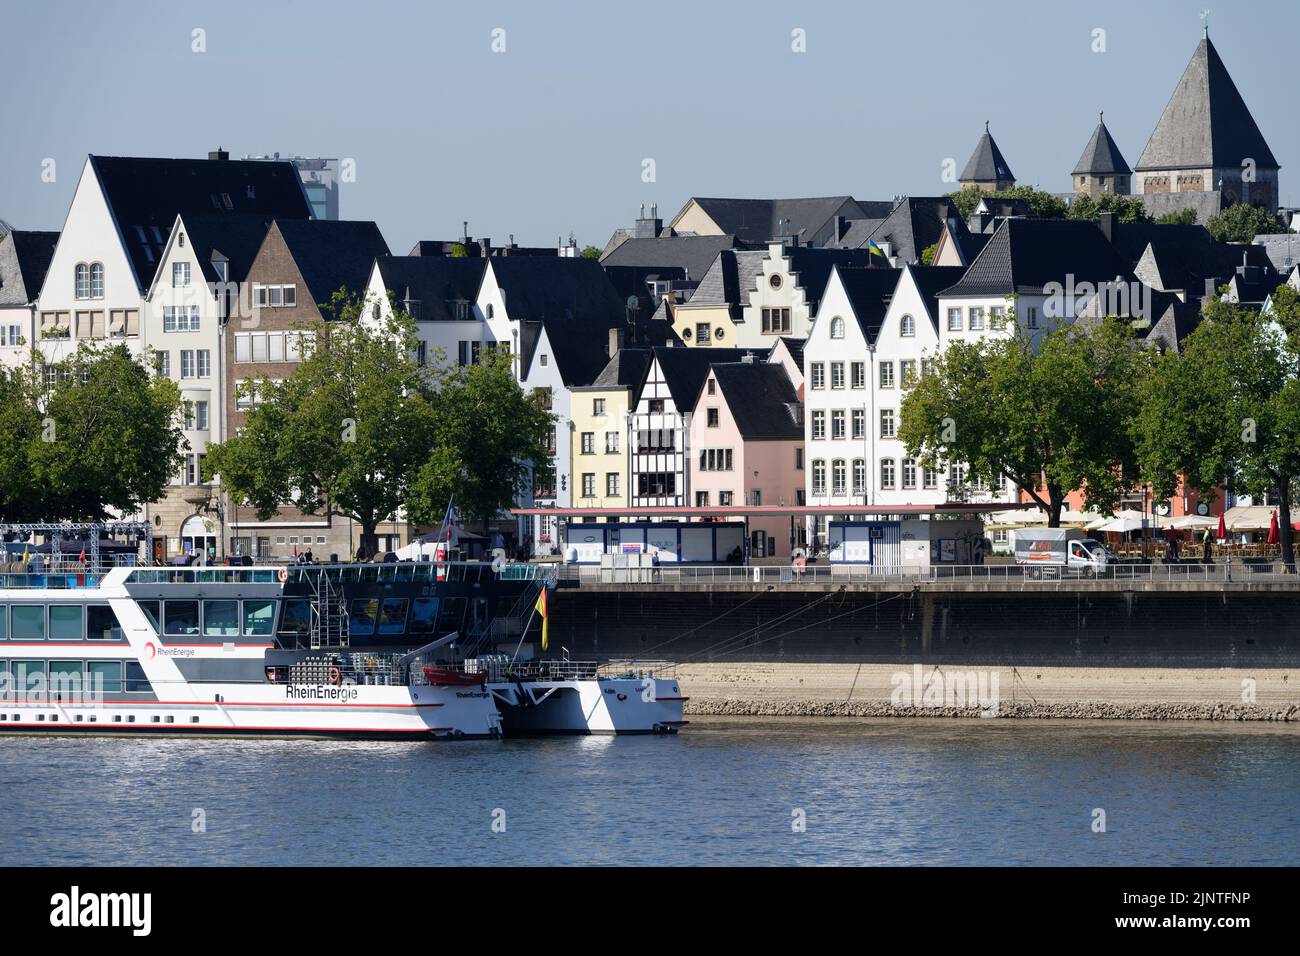 Cologne, Germany August 09, 2022: view of the old town of cologne during the heat period with low water level 2022 Stock Photo